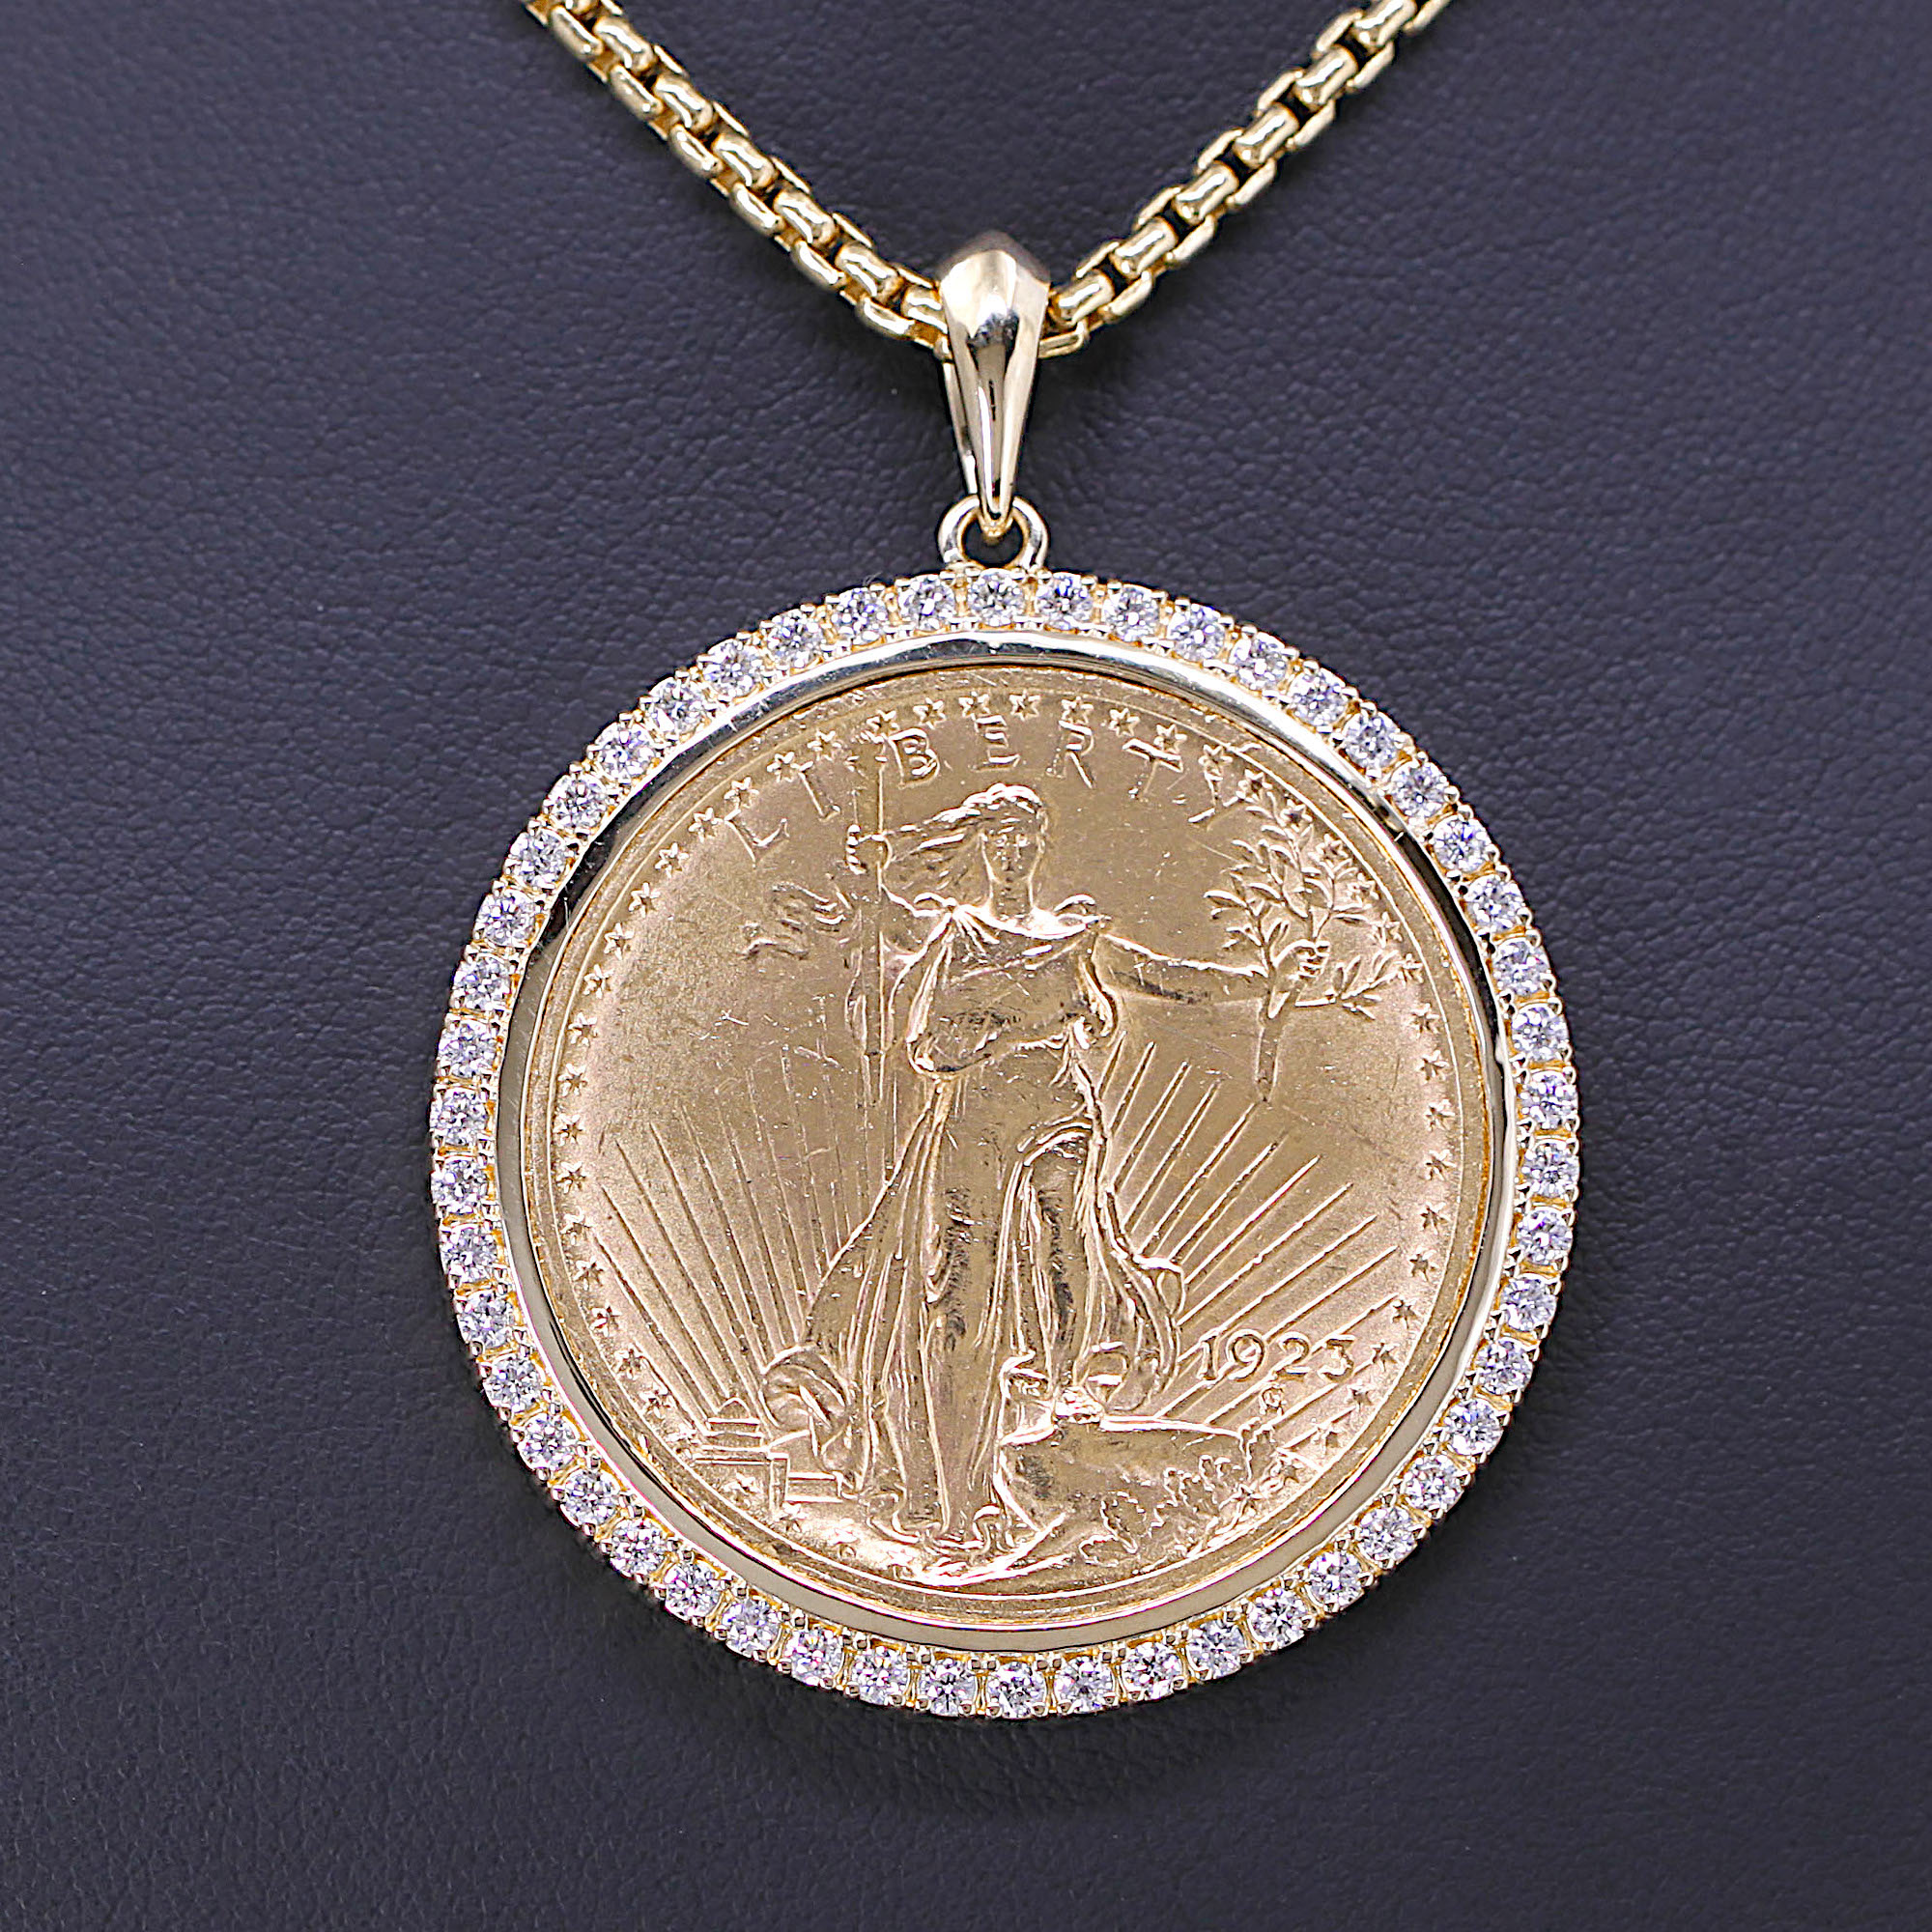 Stunning U.S. $20 Gold Coin and Diamond Necklace (over 1.5ctw of Diamonds)n  Head Gold Coin Necklace, Arrow Style with Diamond